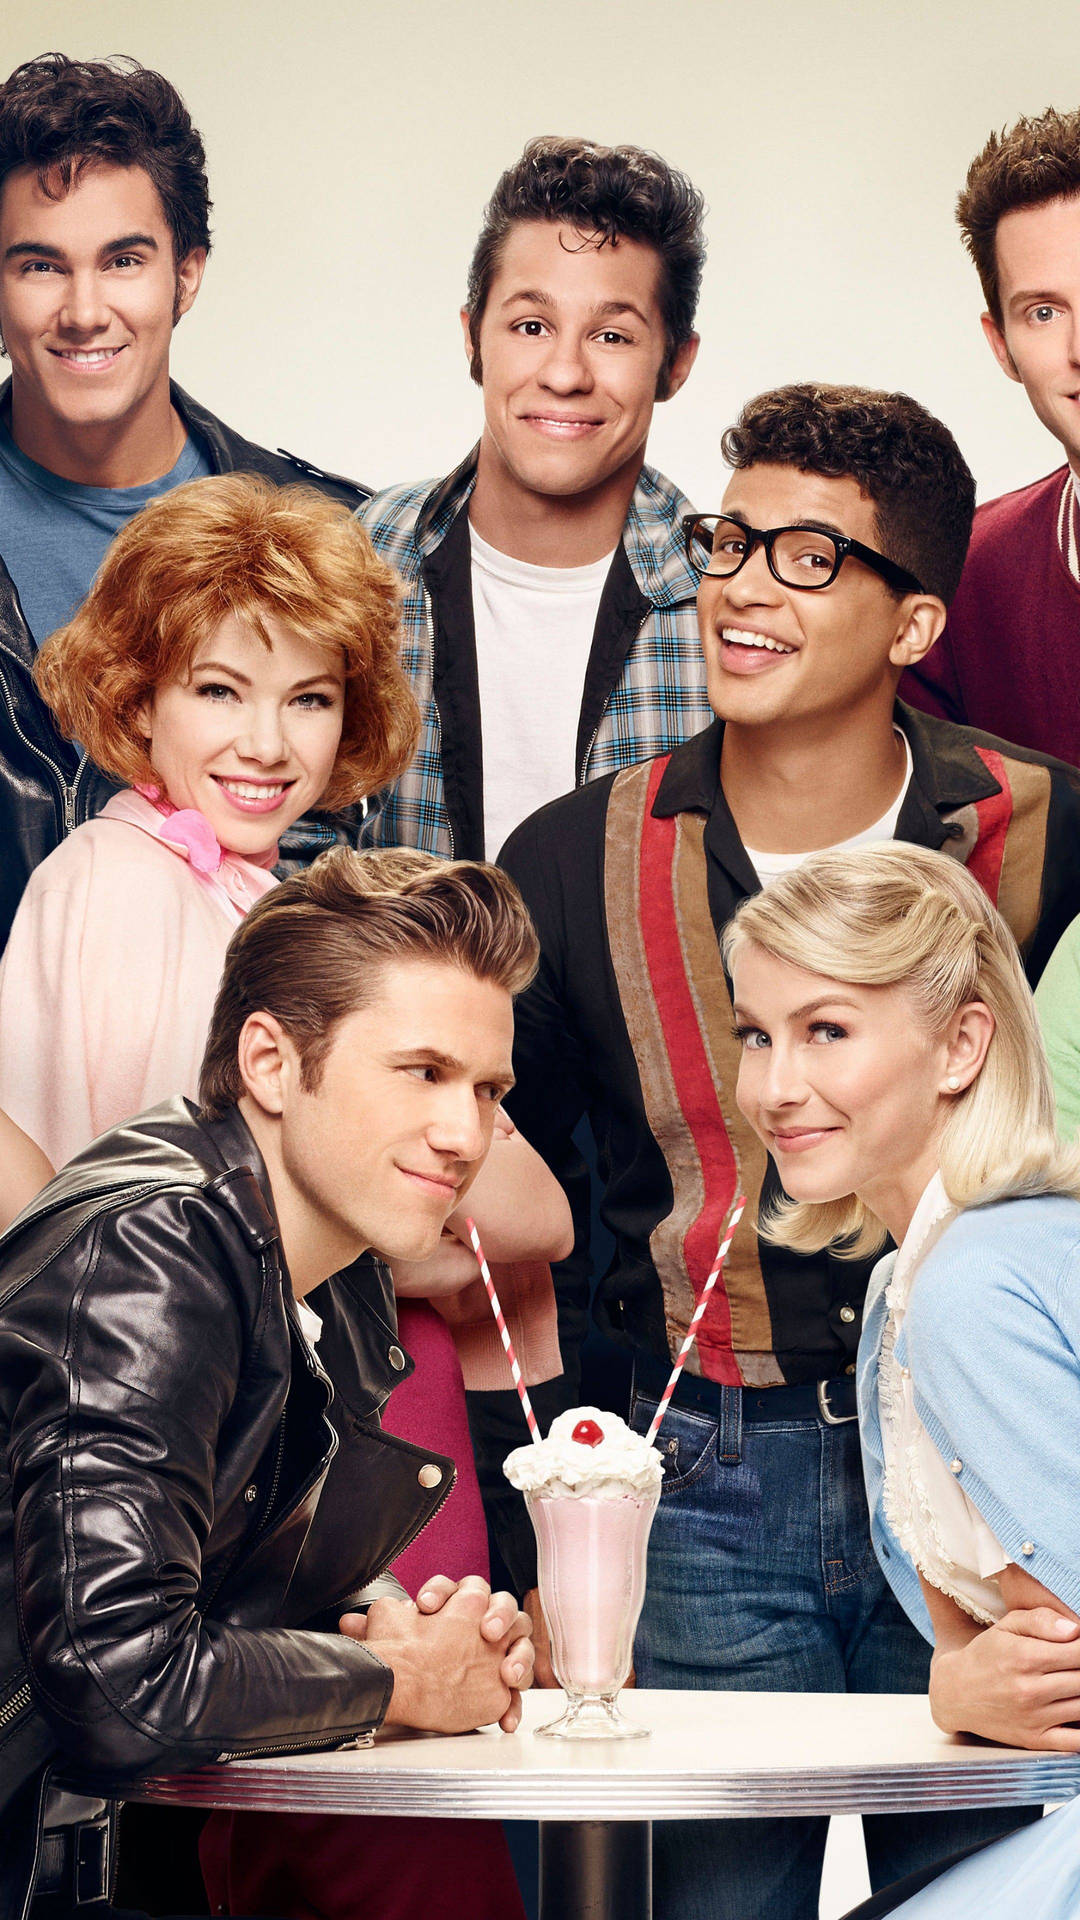 Grease Live High Quality Photograph Background